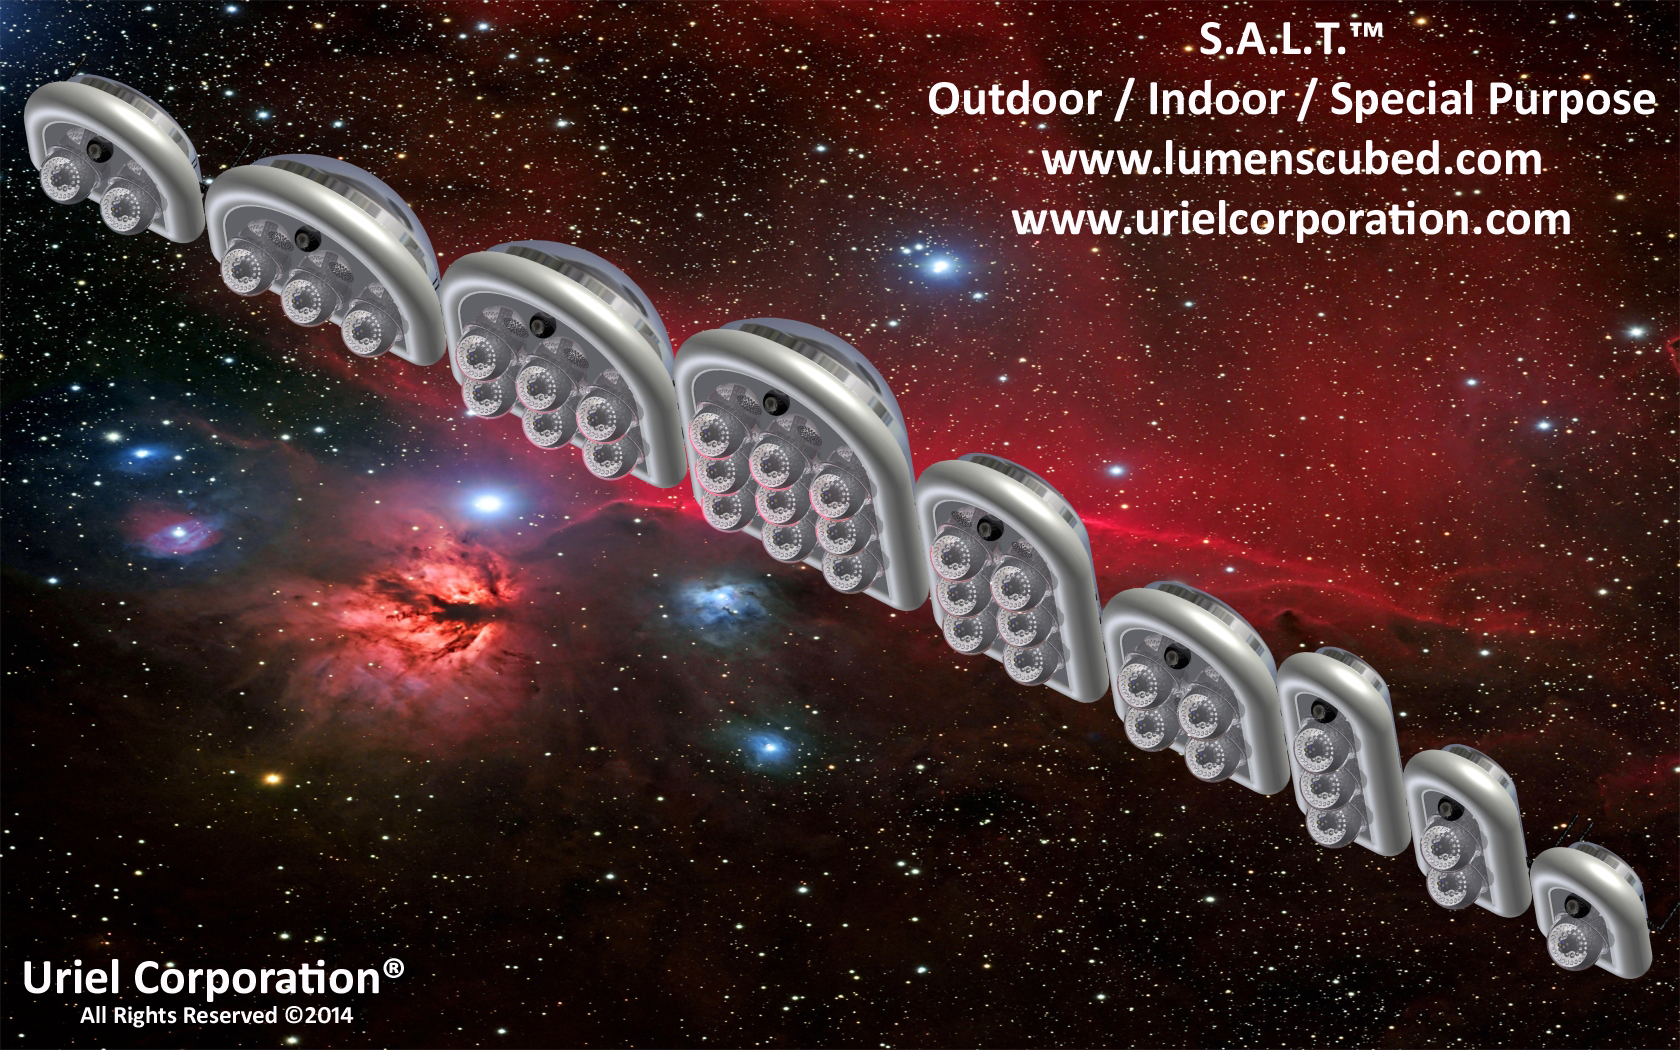 SERVO / STEPPER ASSISTED LIGHTING TECHNOLOGY (S.A.L.T.)™ OUTDOOR-INDOOR-SPECIAL PURPOSE METALLIC ROTATABLE LED LIGHTING